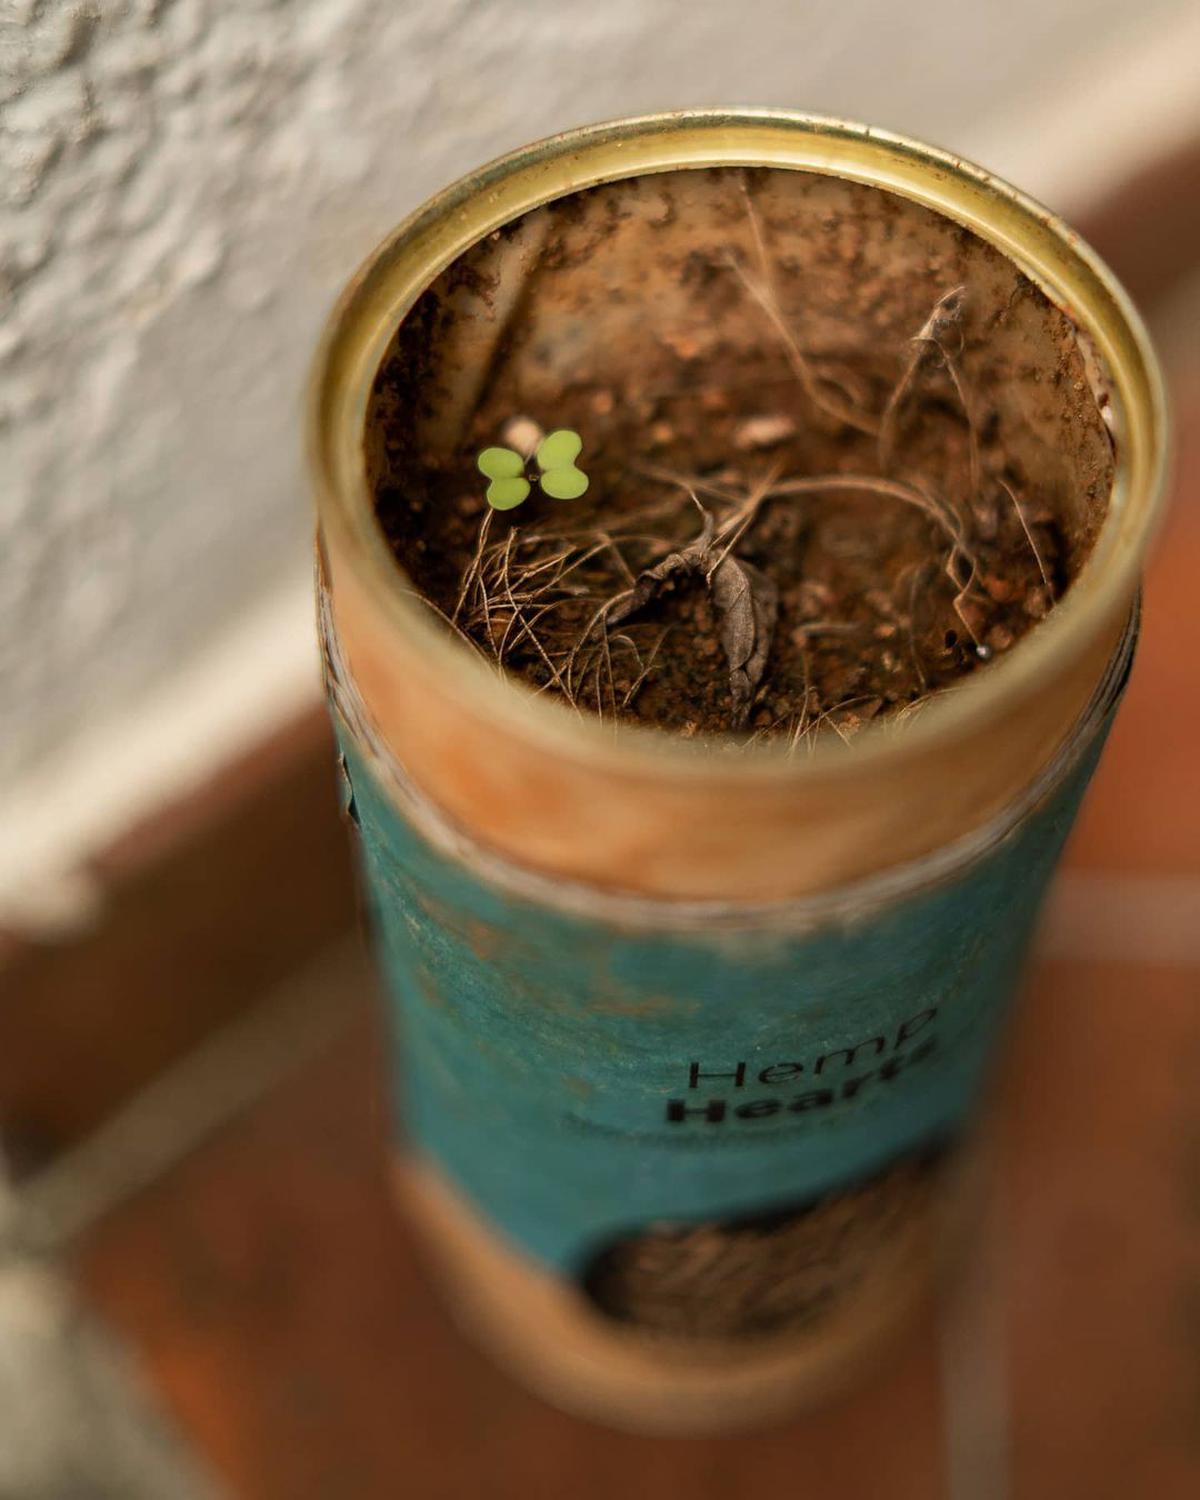 A repurposed canister